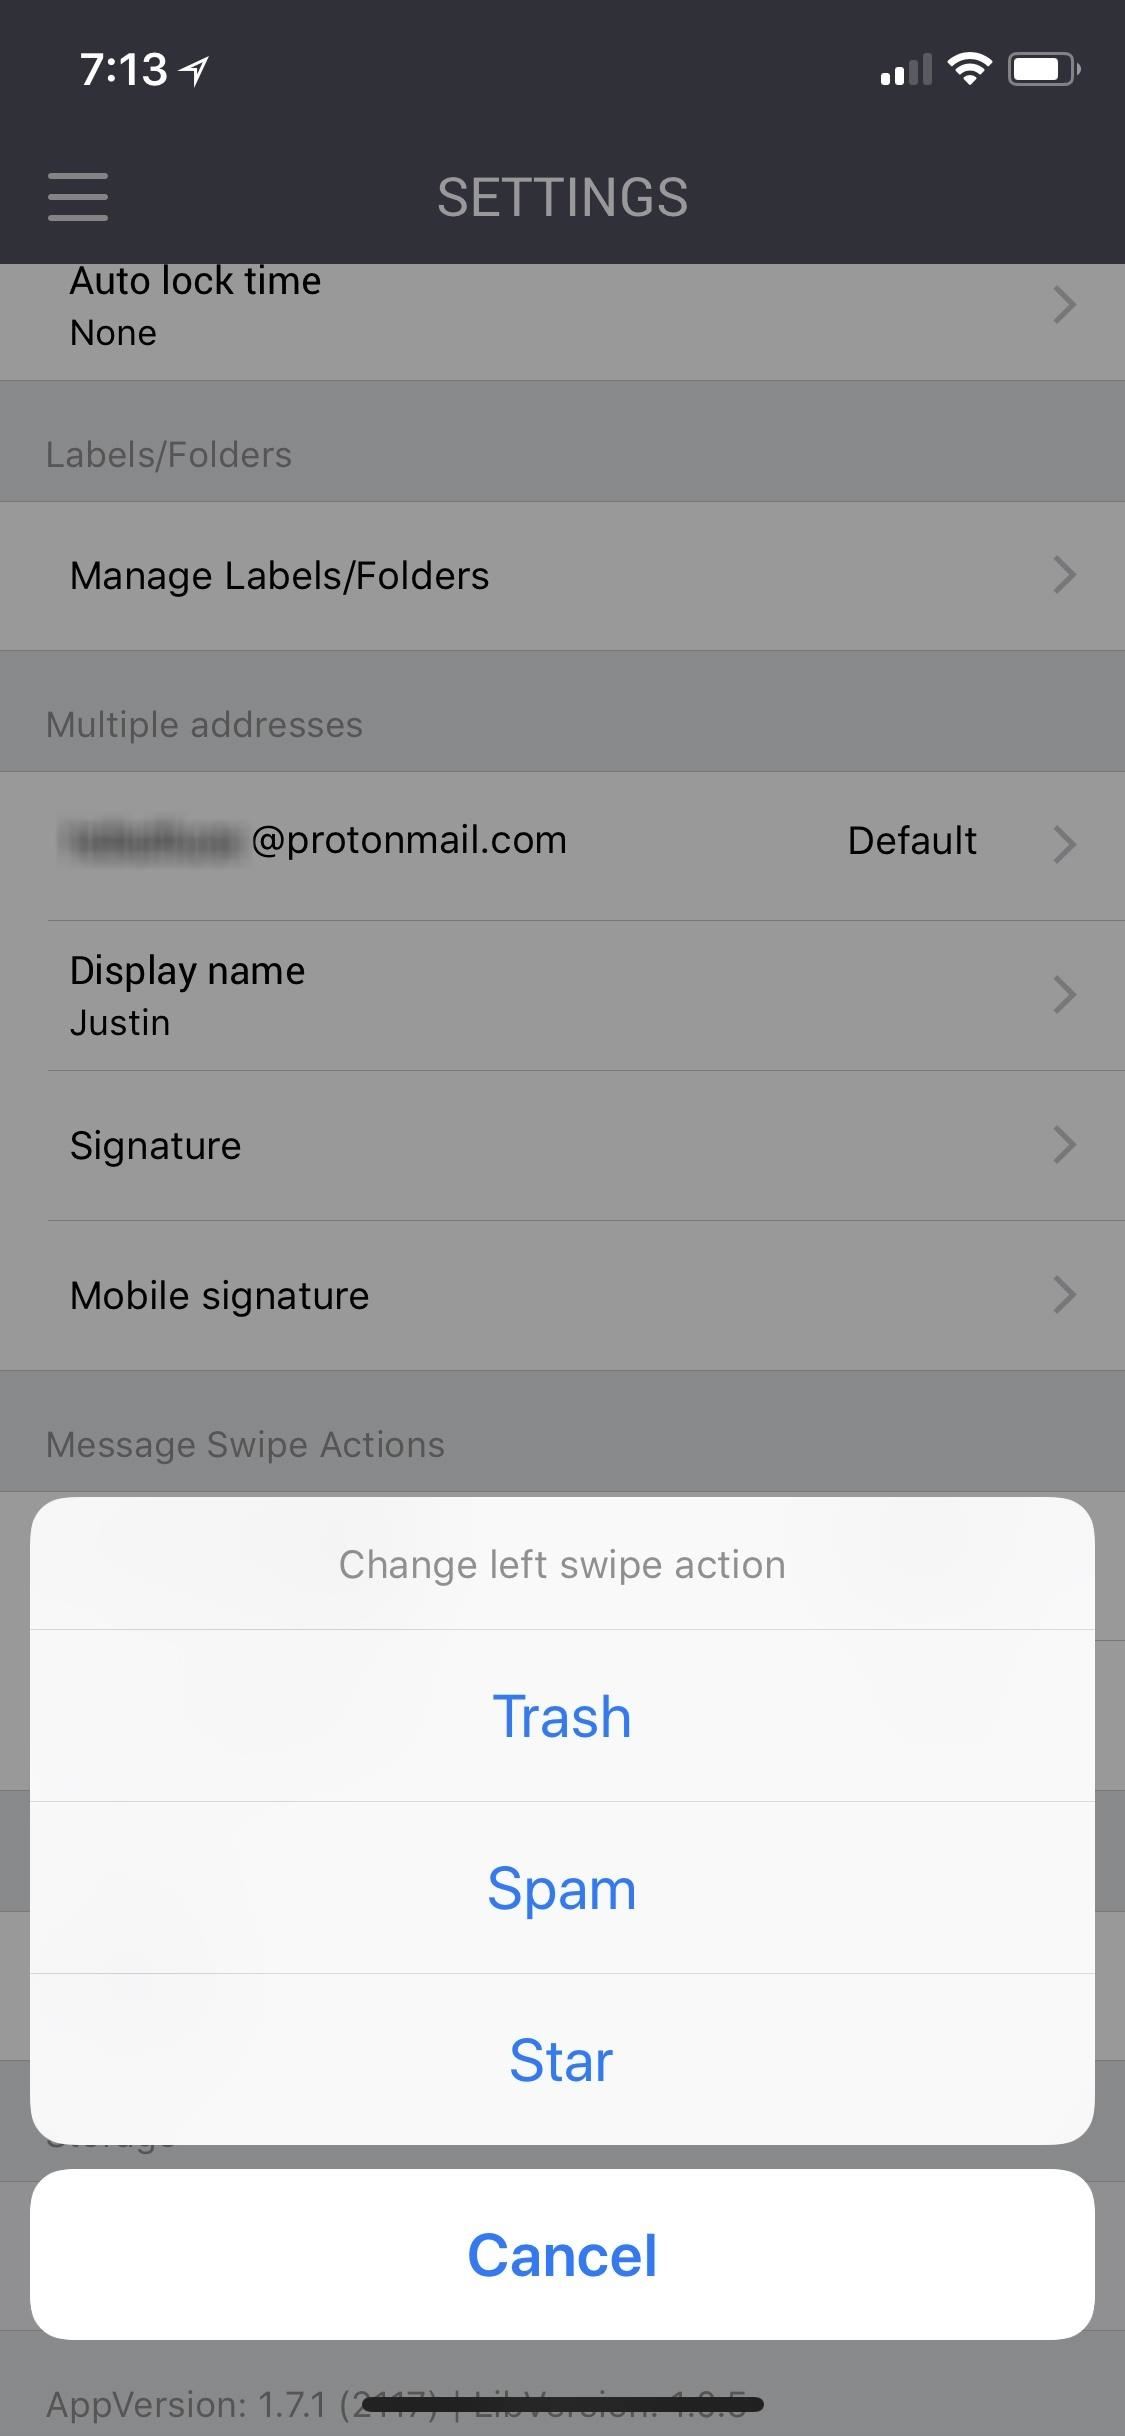 ProtonMail 101: How to Customize Swipe Actions for Messages